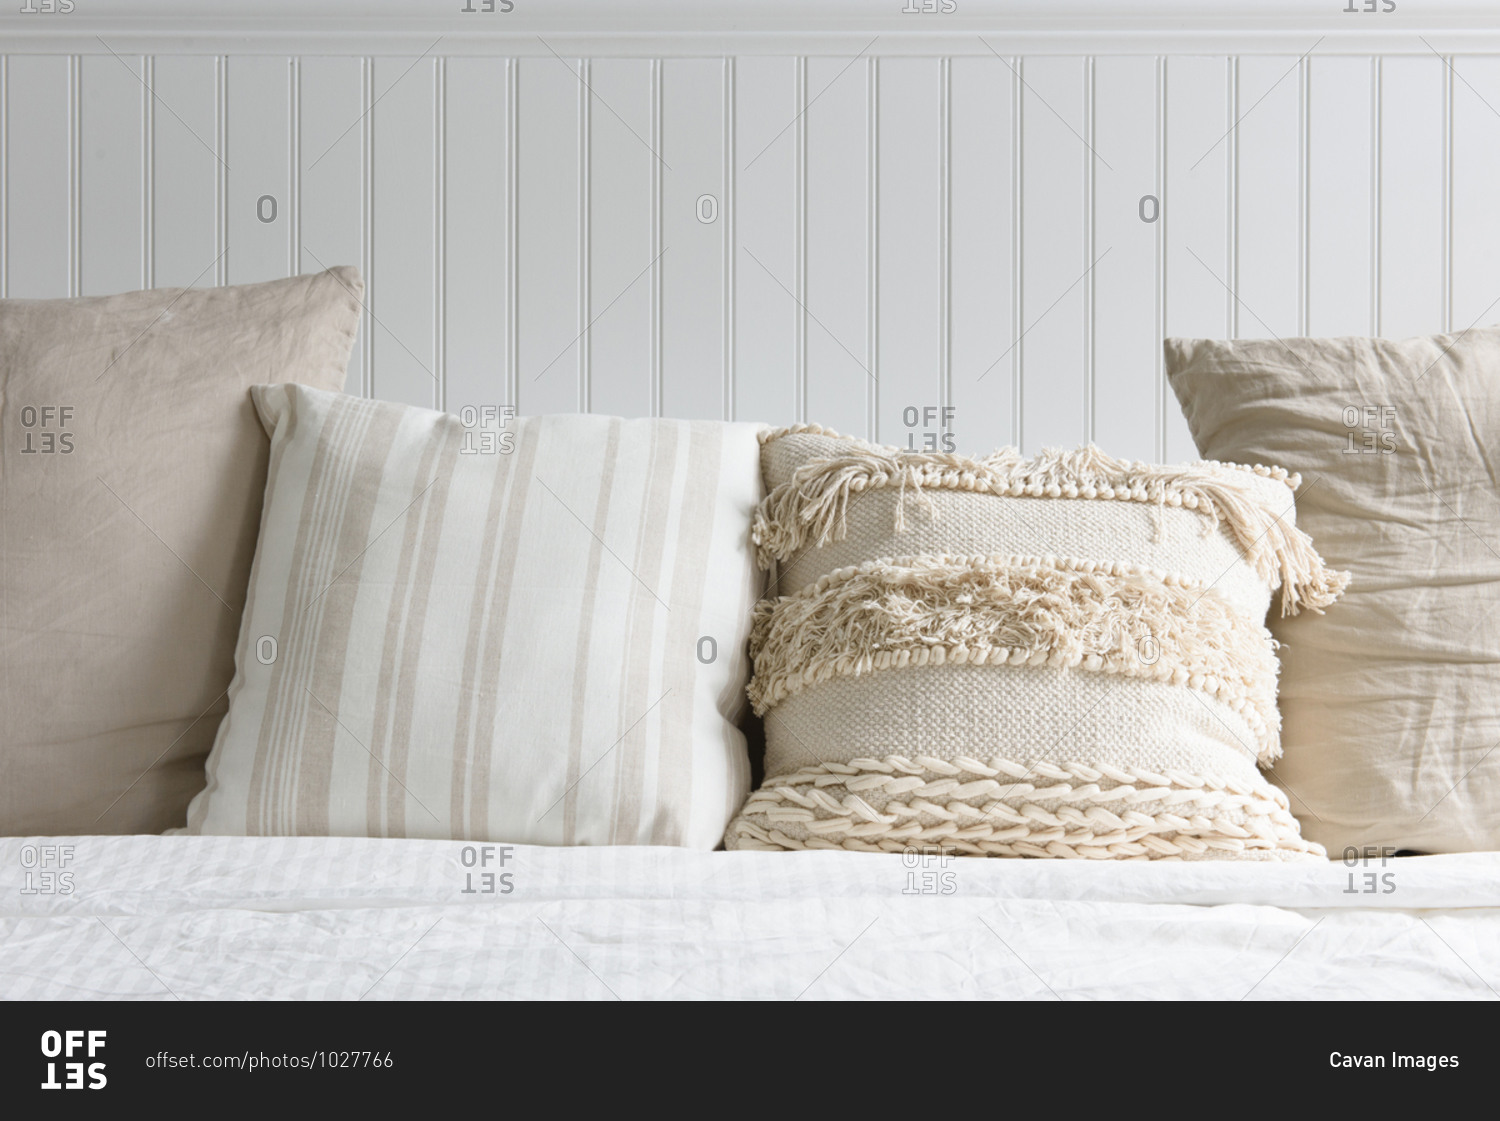 A collection of white and cream pillows on a bed with wood headboard